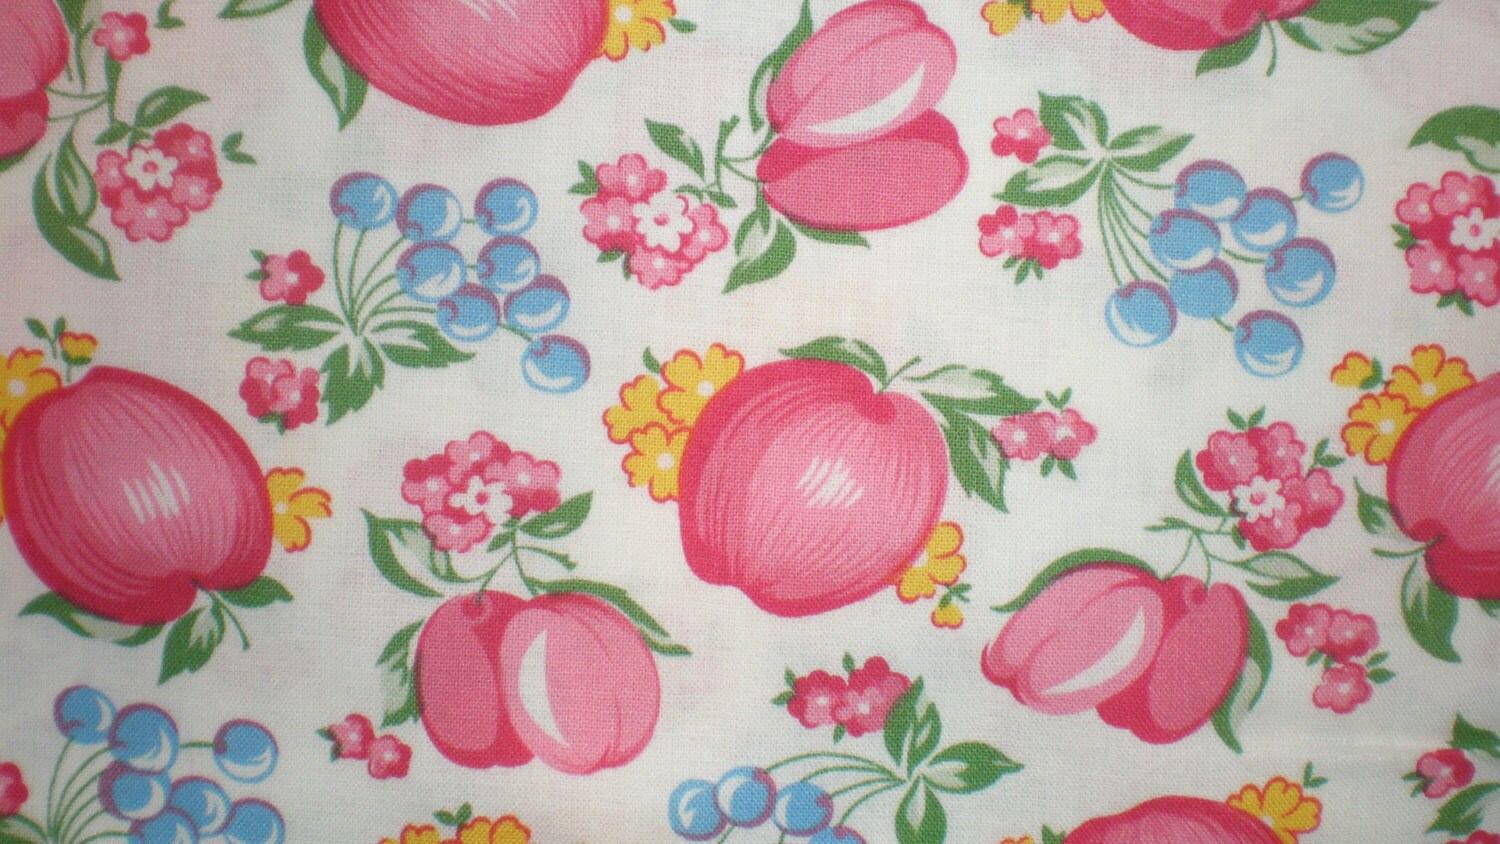 Vintage Reproduction 1940's Fruit Fabric By The Yard From